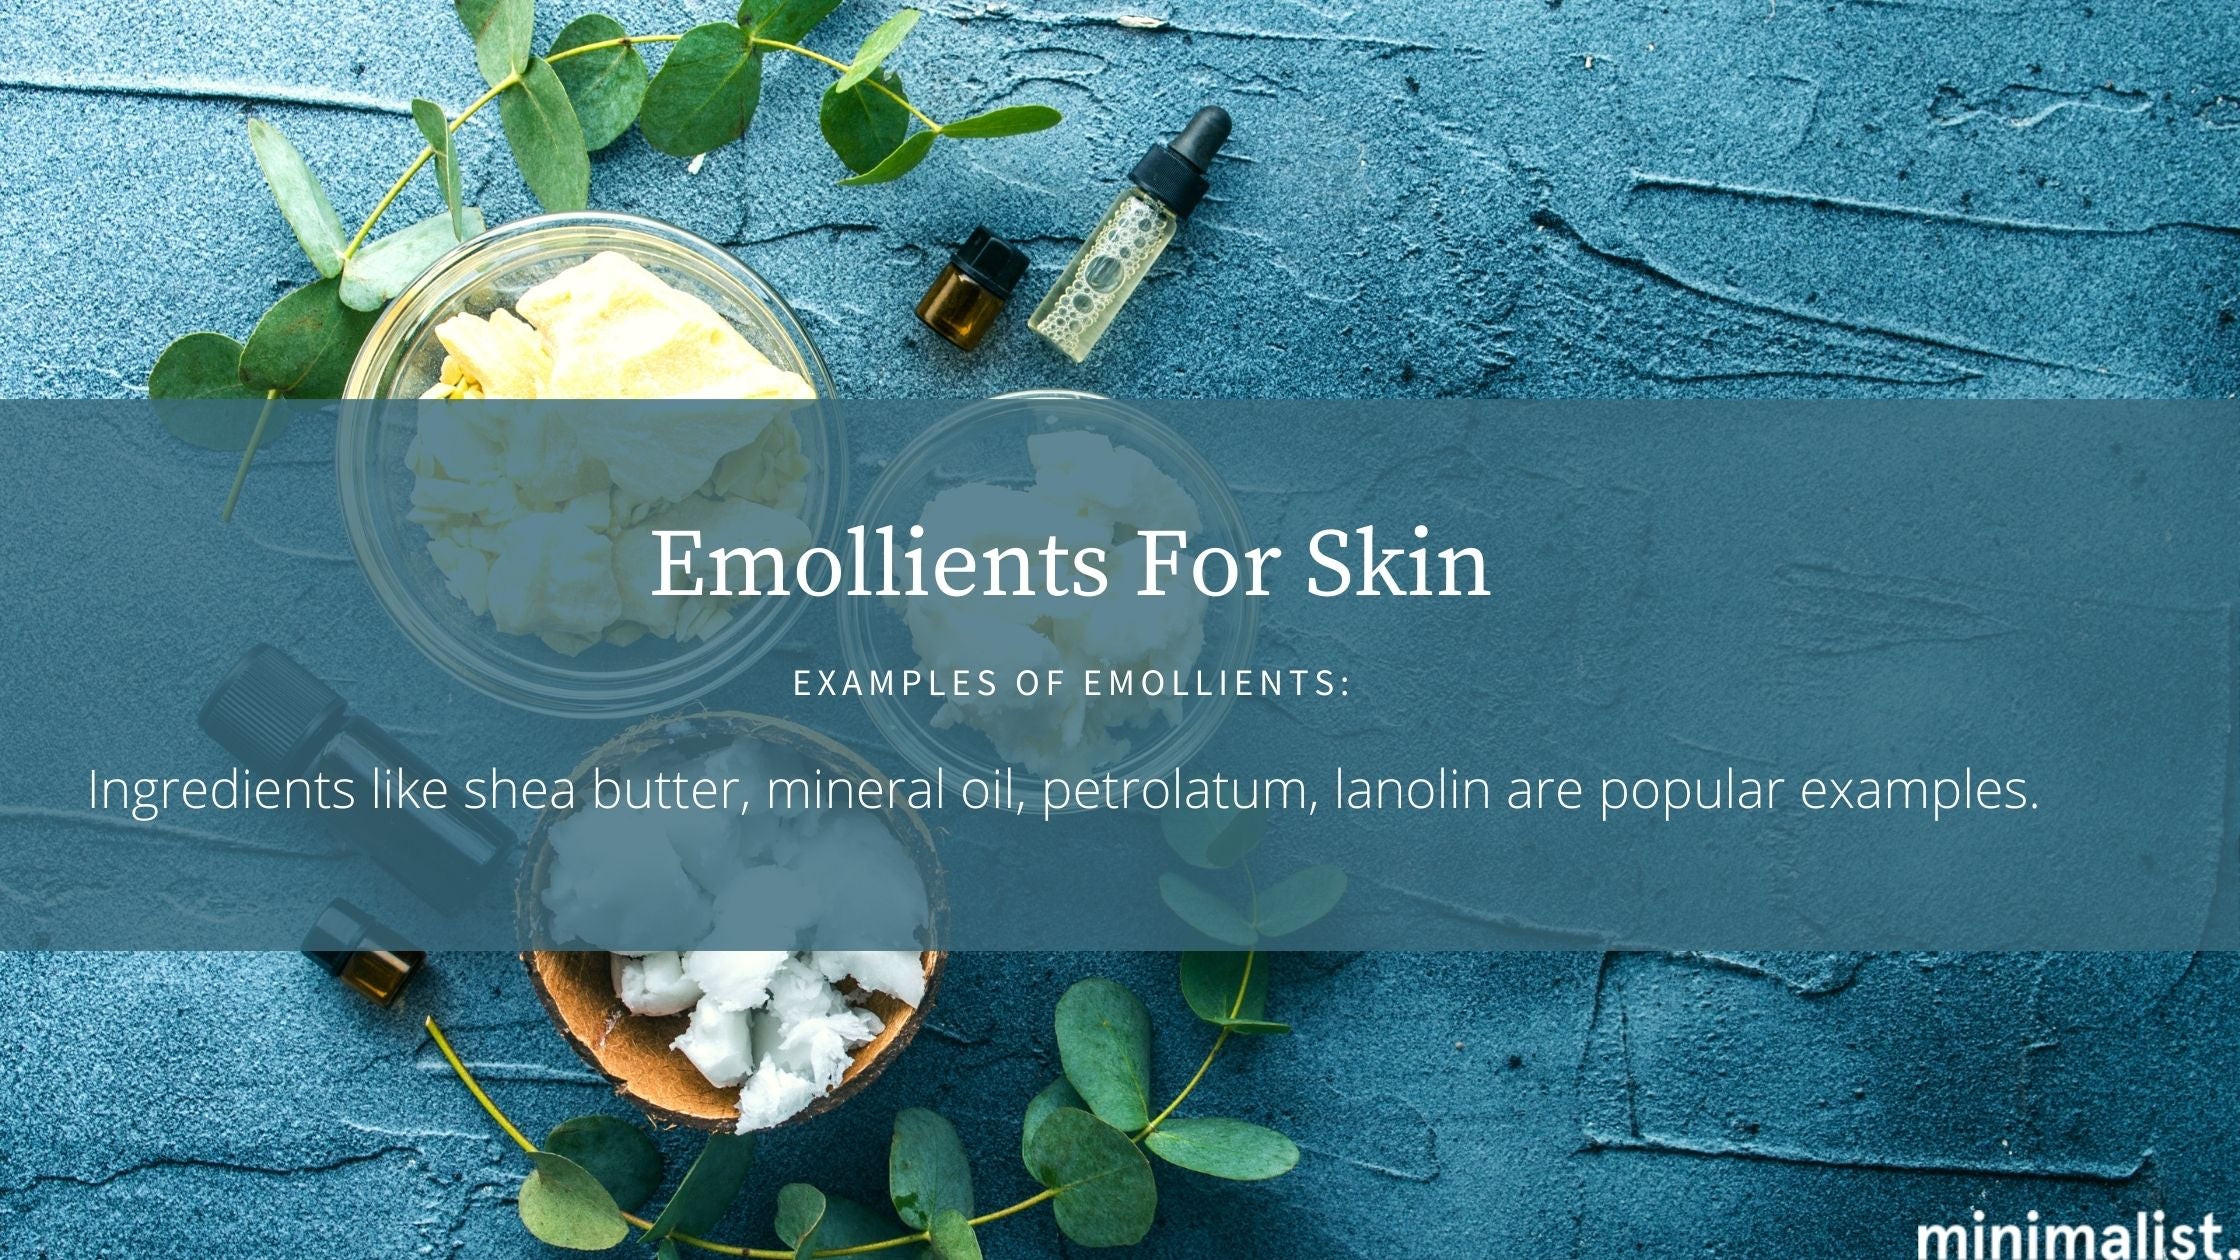 What are Emollients?